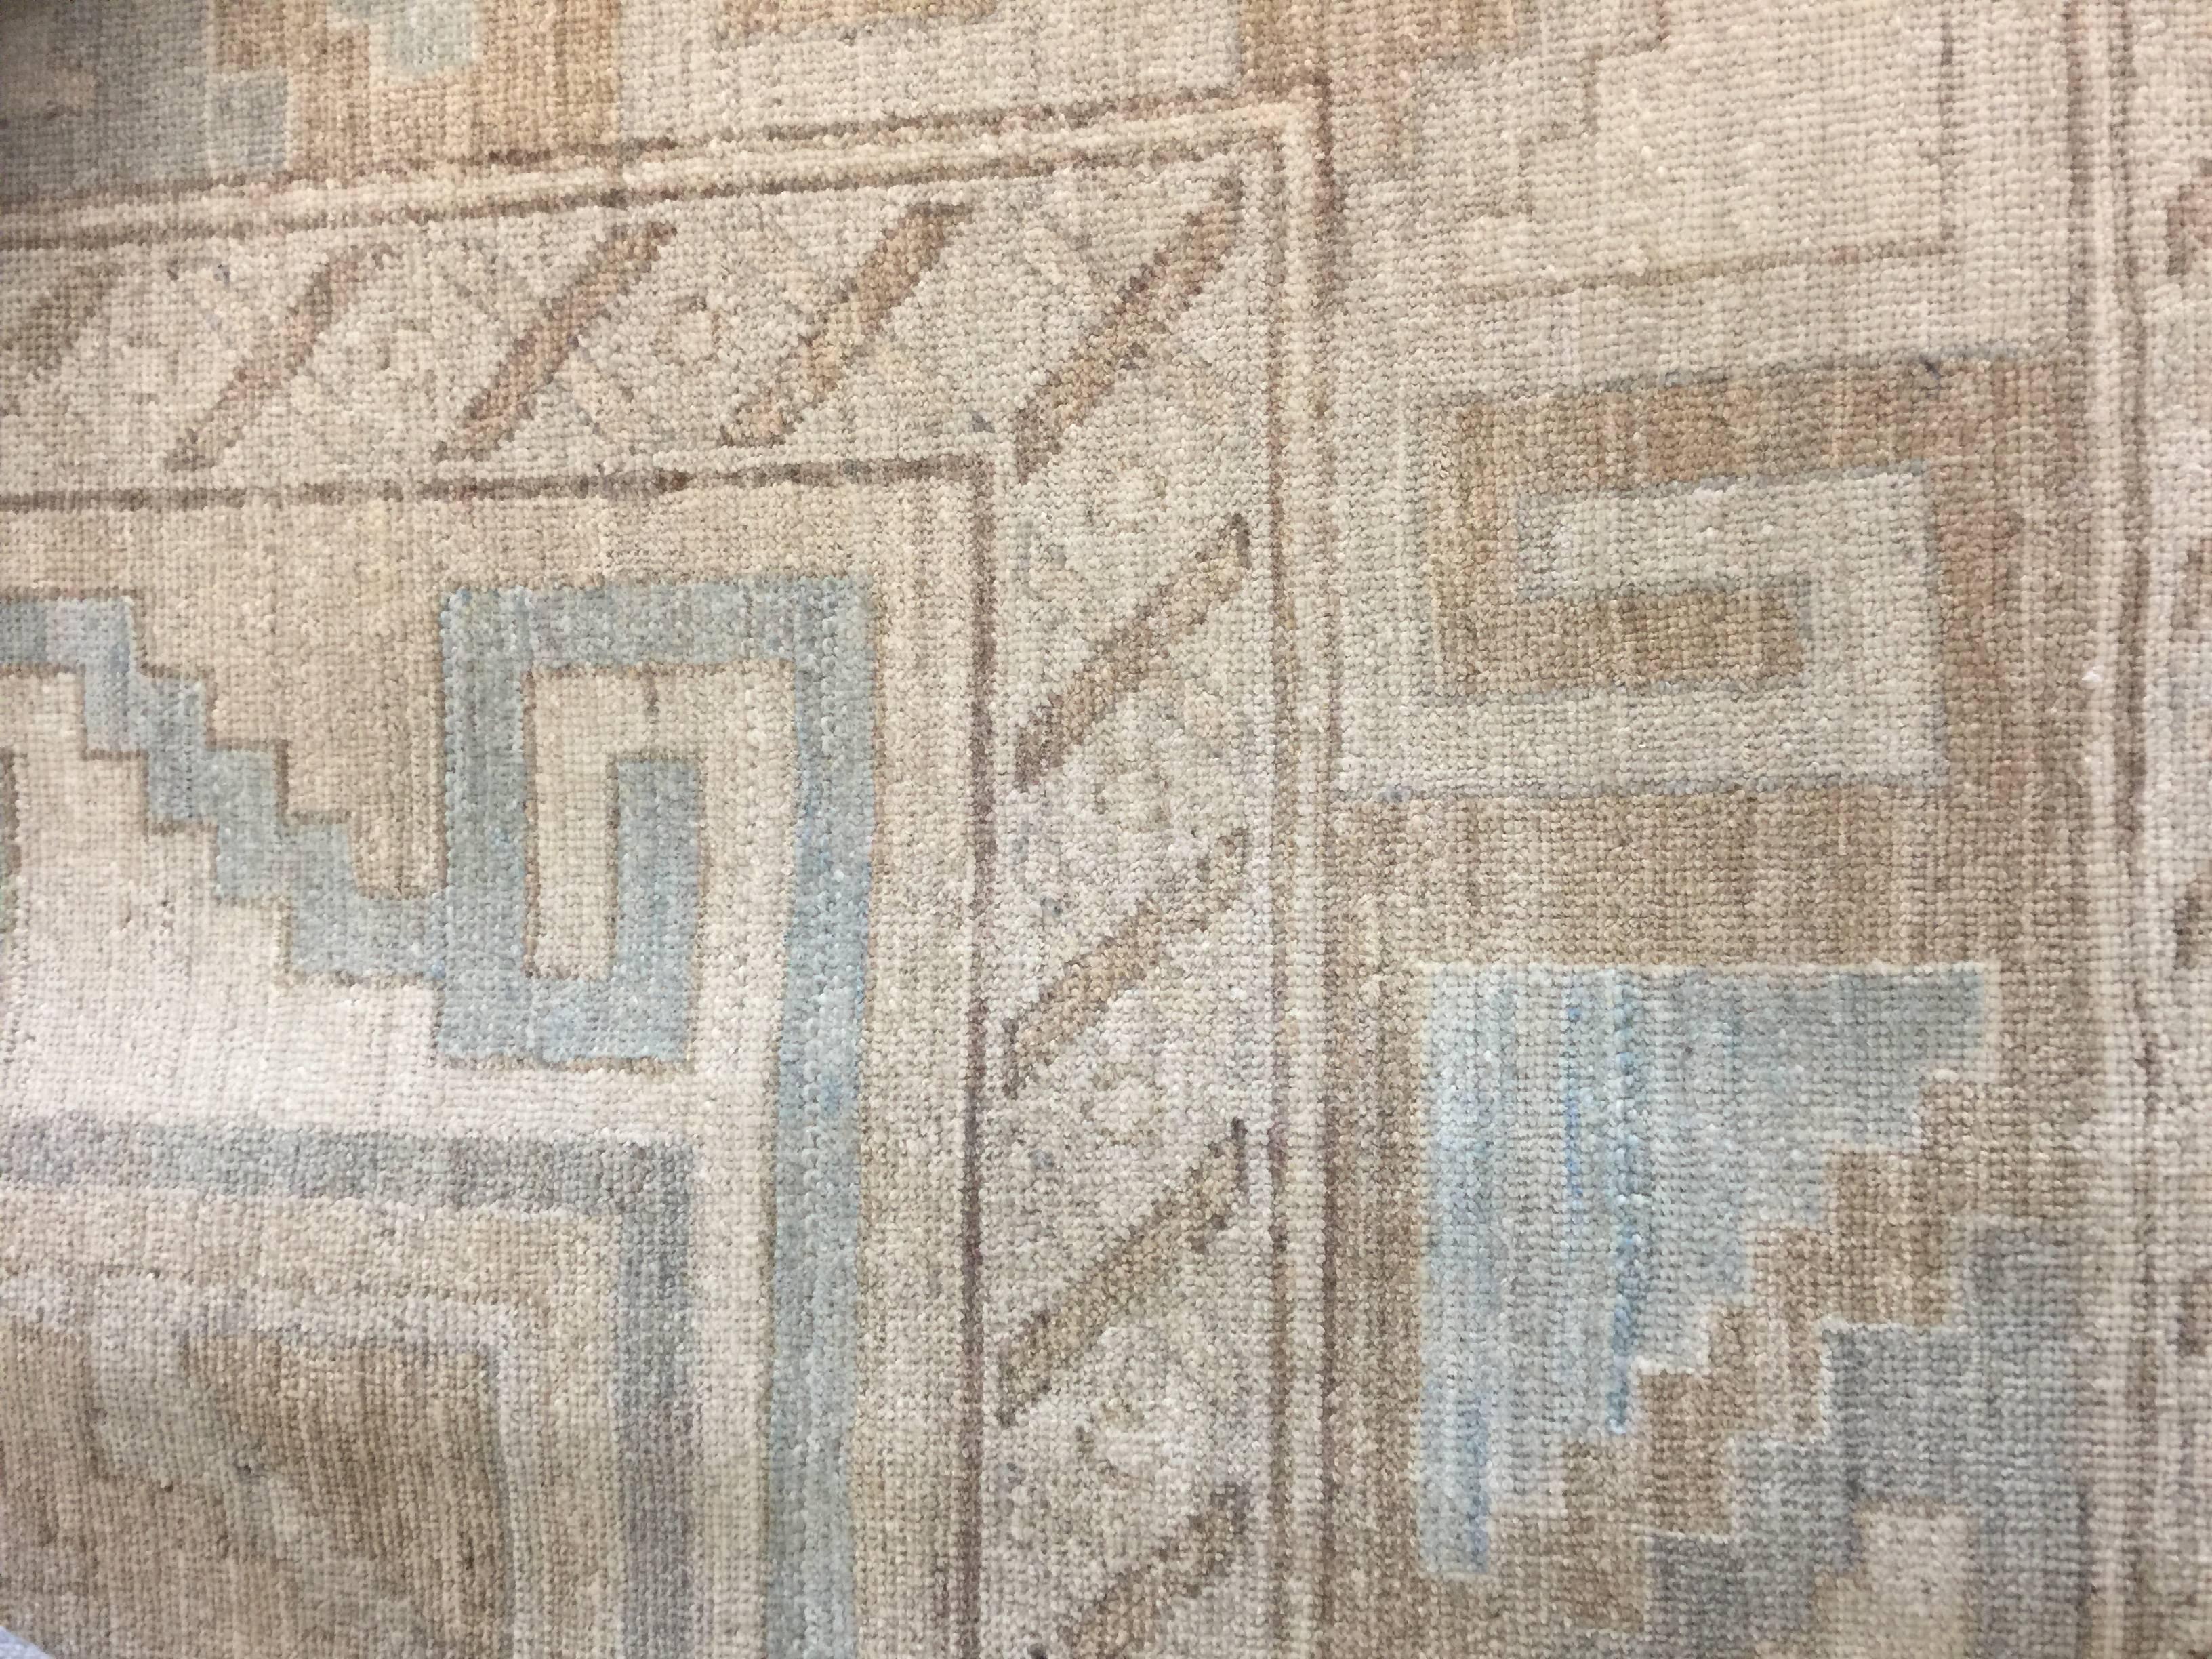 Contemporary New Transitional Area Rug with Khotan Design in Warm, Neutral Colors